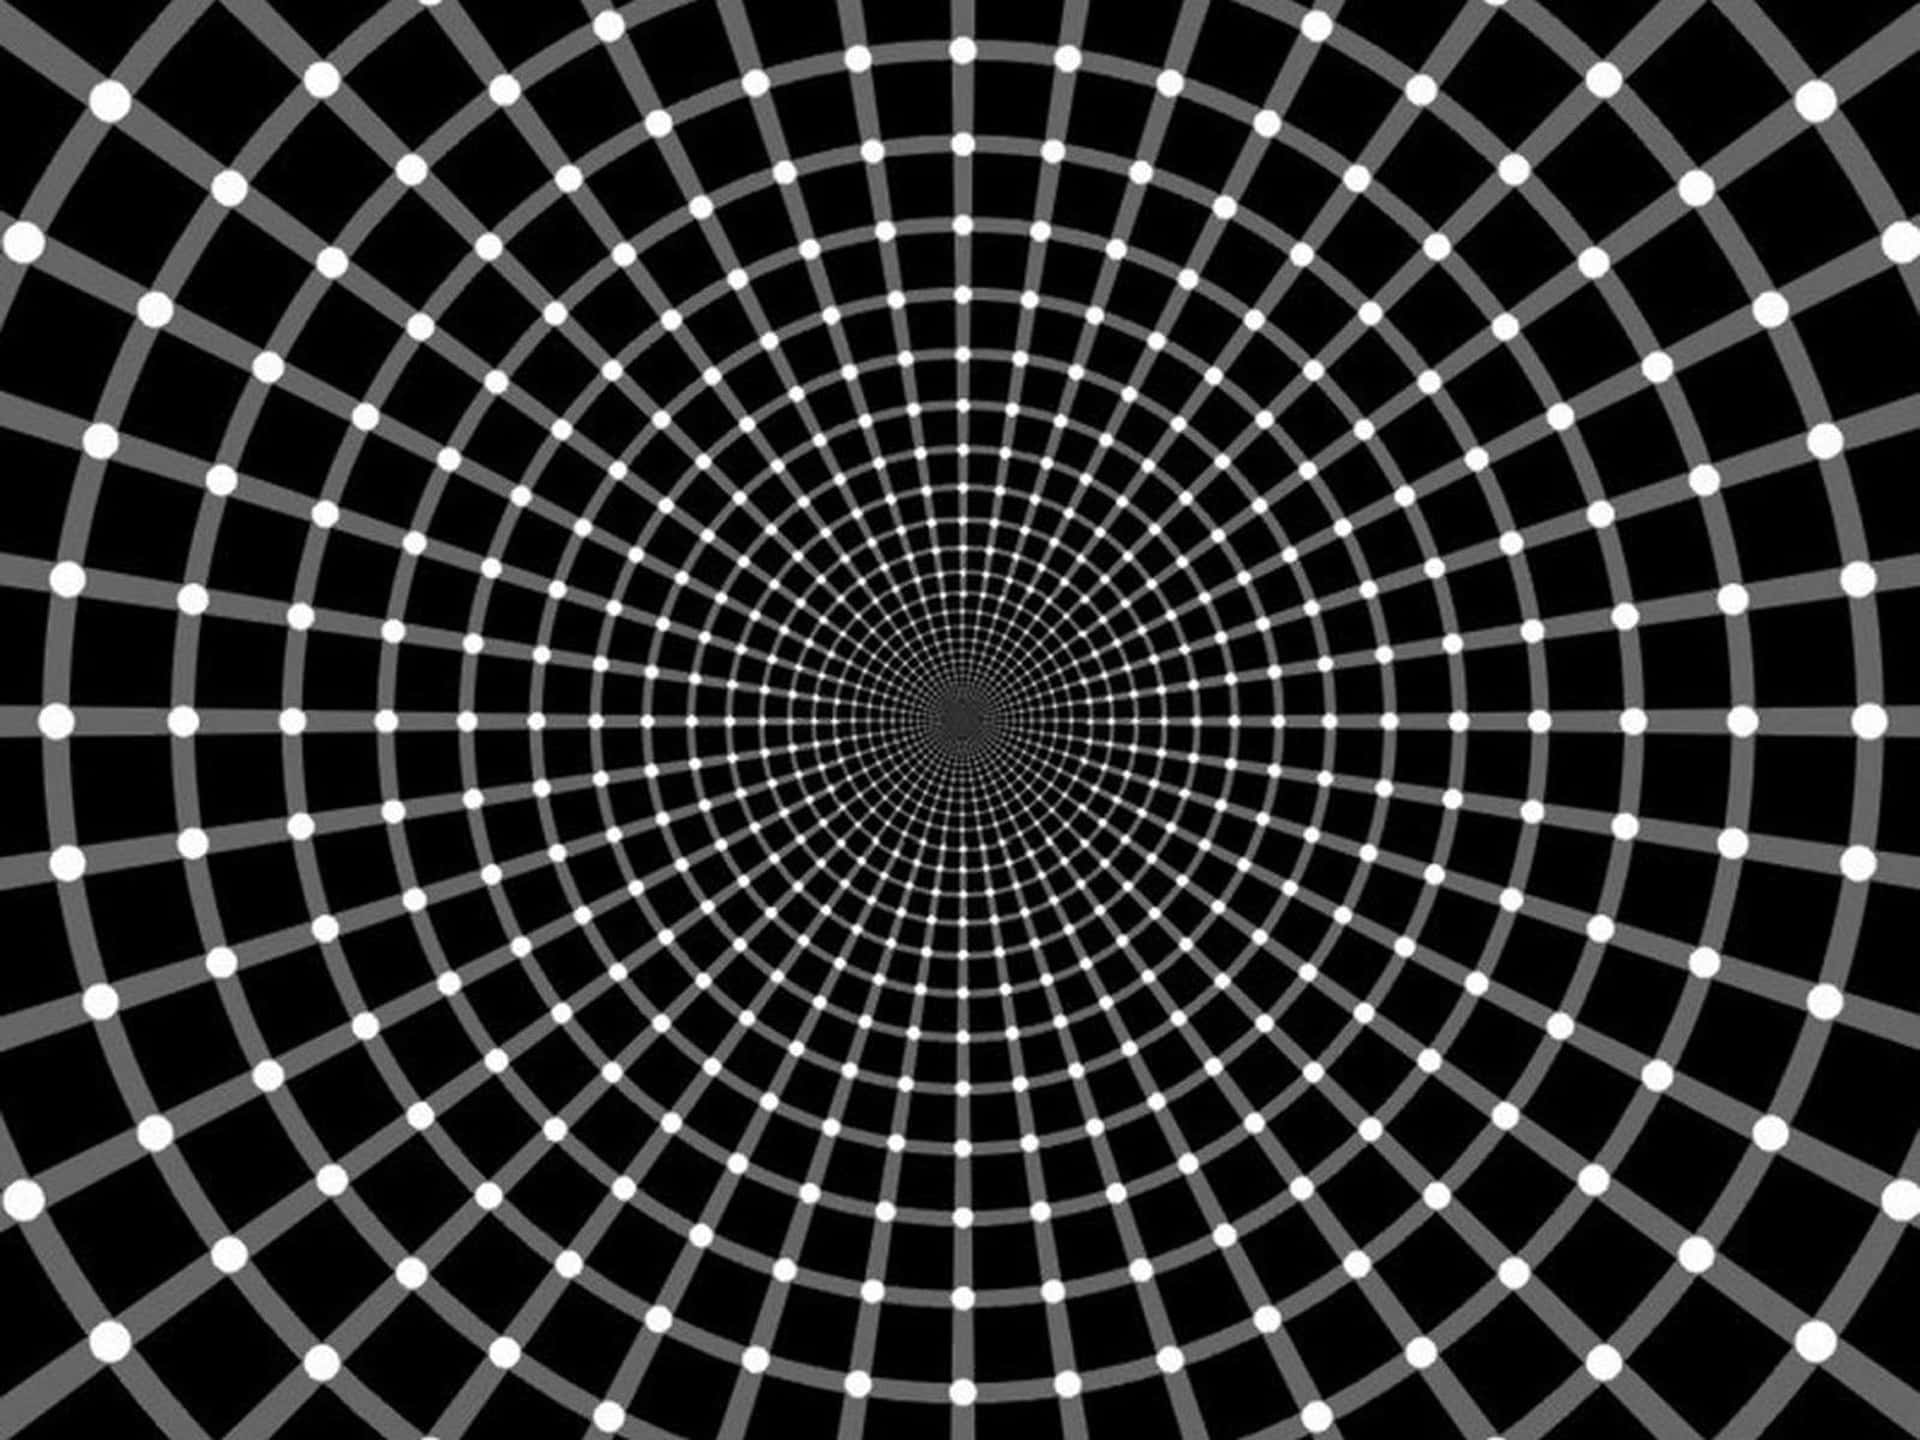 Mesmerizing Optical Illusion with Swirling Black and White Patterns Wallpaper